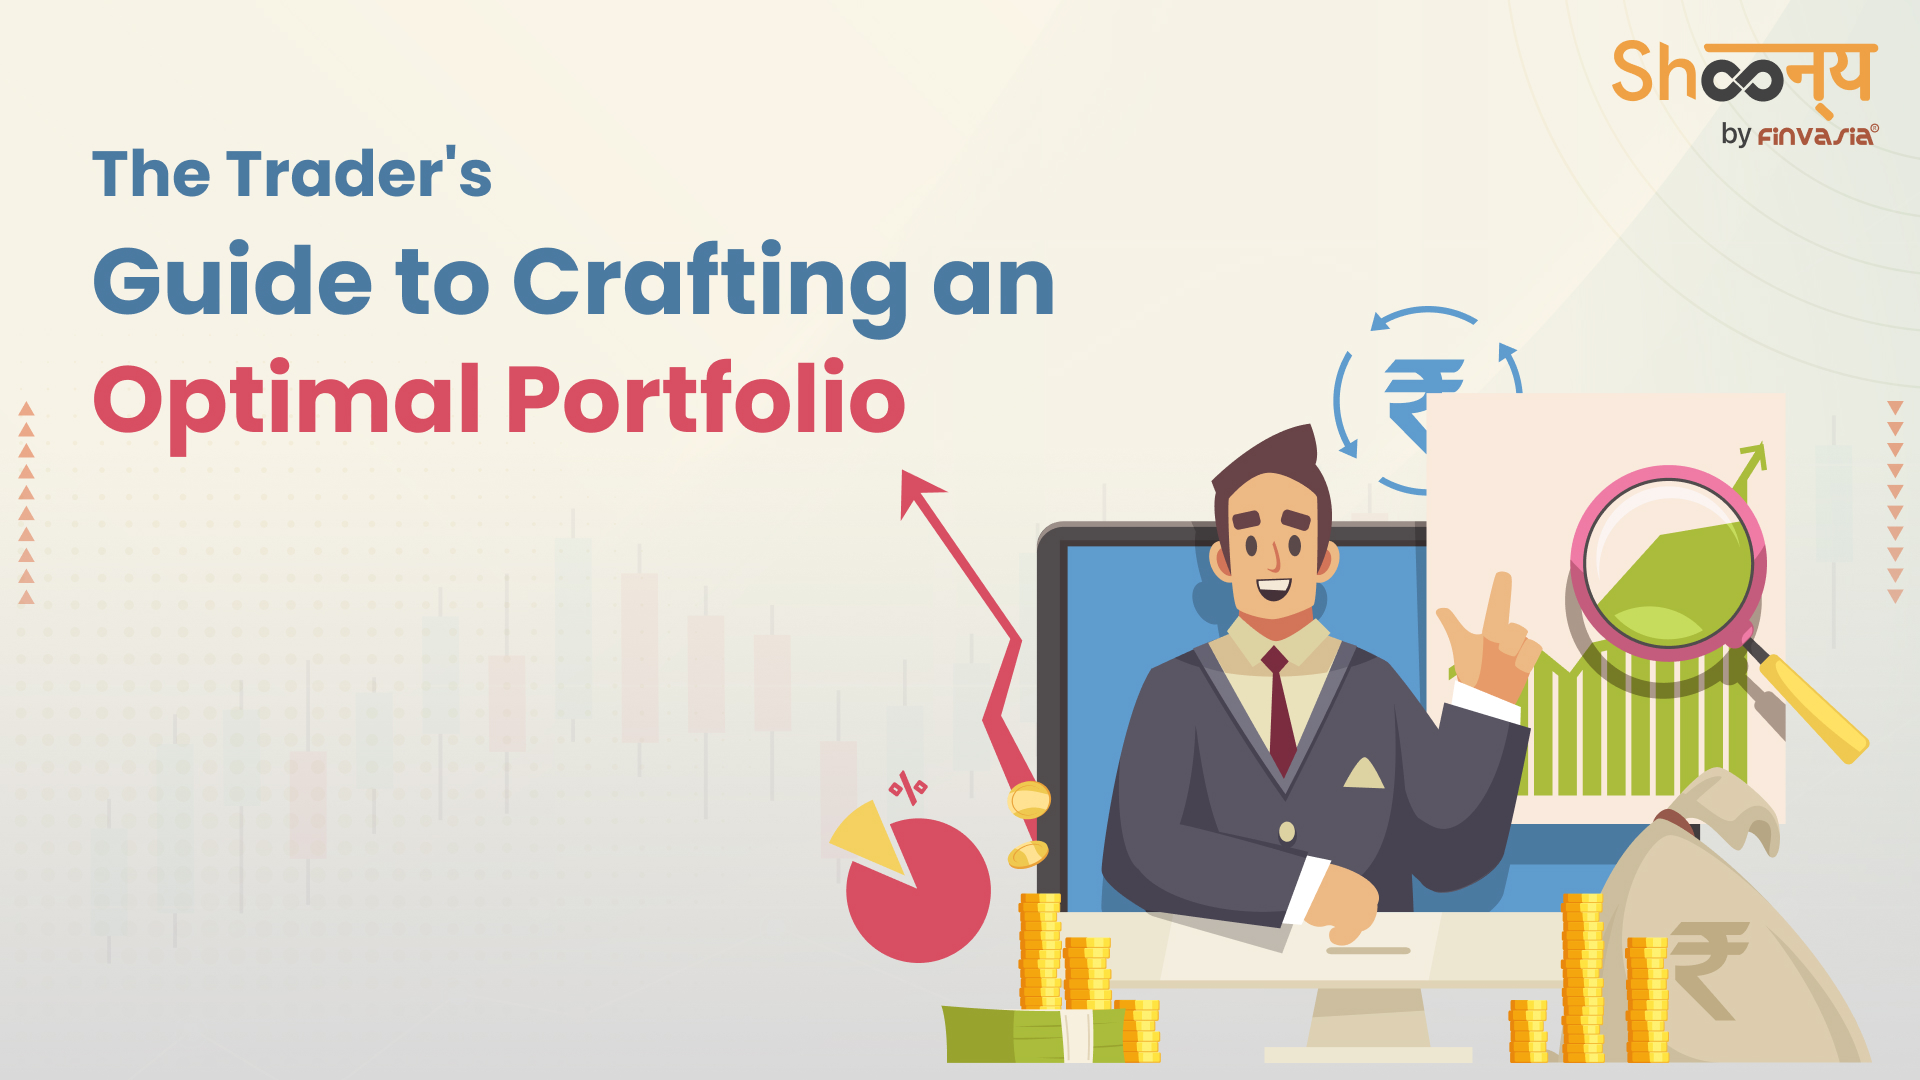 The Trader's Guide to Crafting an Optimal Portfolio